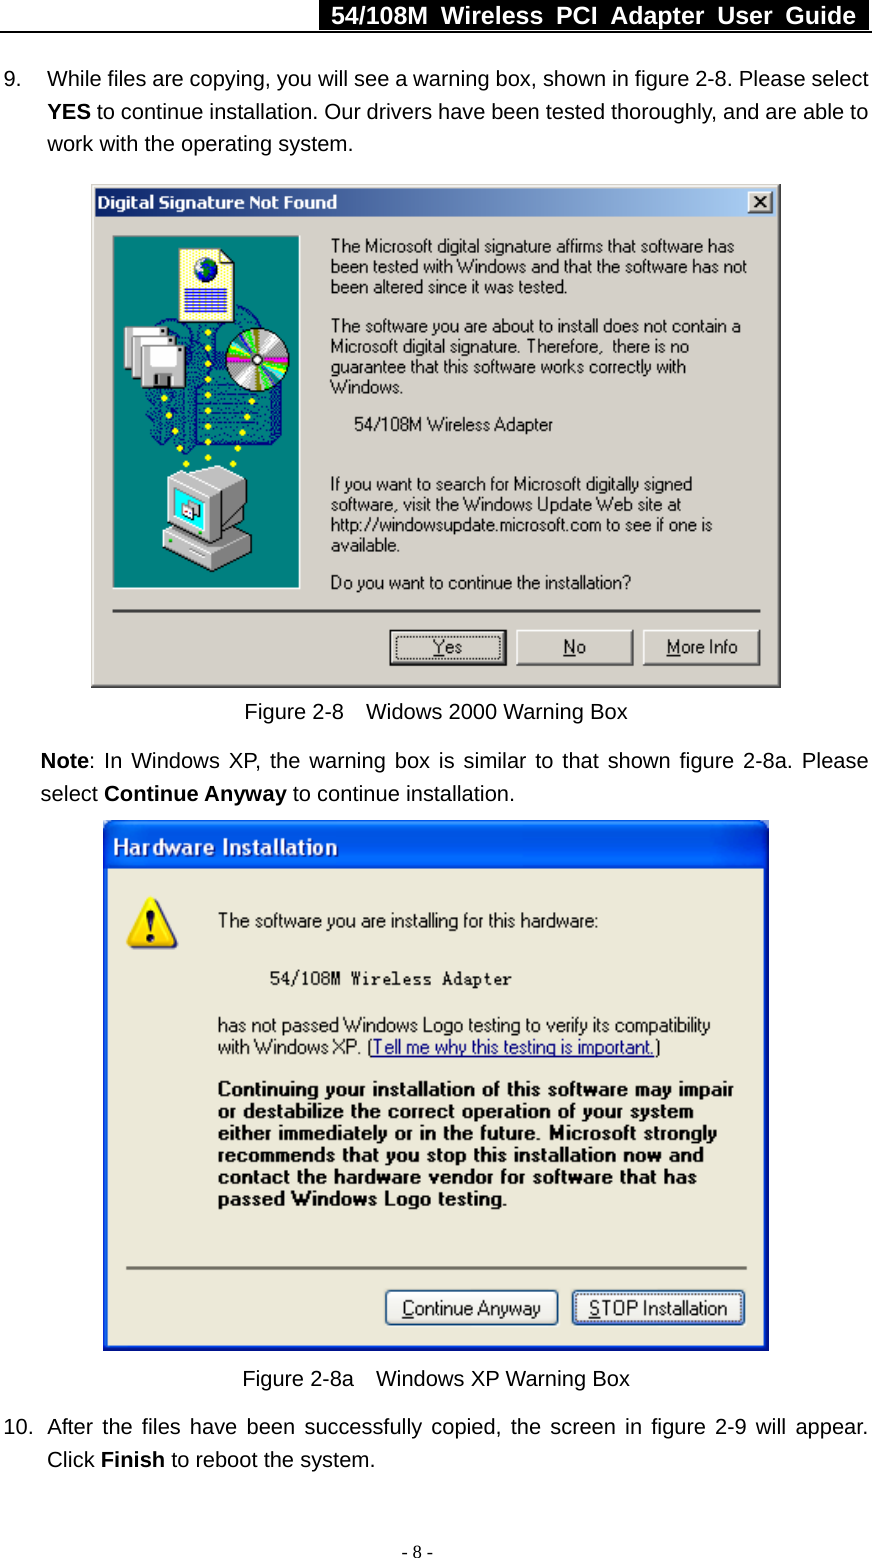   54/108M Wireless PCI Adapter User Guide  - 8 - 9.  While files are copying, you will see a warning box, shown in figure 2-8. Please select YES to continue installation. Our drivers have been tested thoroughly, and are able to work with the operating system.  Figure 2-8    Widows 2000 Warning Box Note: In Windows XP, the warning box is similar to that shown figure 2-8a. Please select Continue Anyway to continue installation.  Figure 2-8a    Windows XP Warning Box 10.  After the files have been successfully copied, the screen in figure 2-9 will appear. Click Finish to reboot the system. 